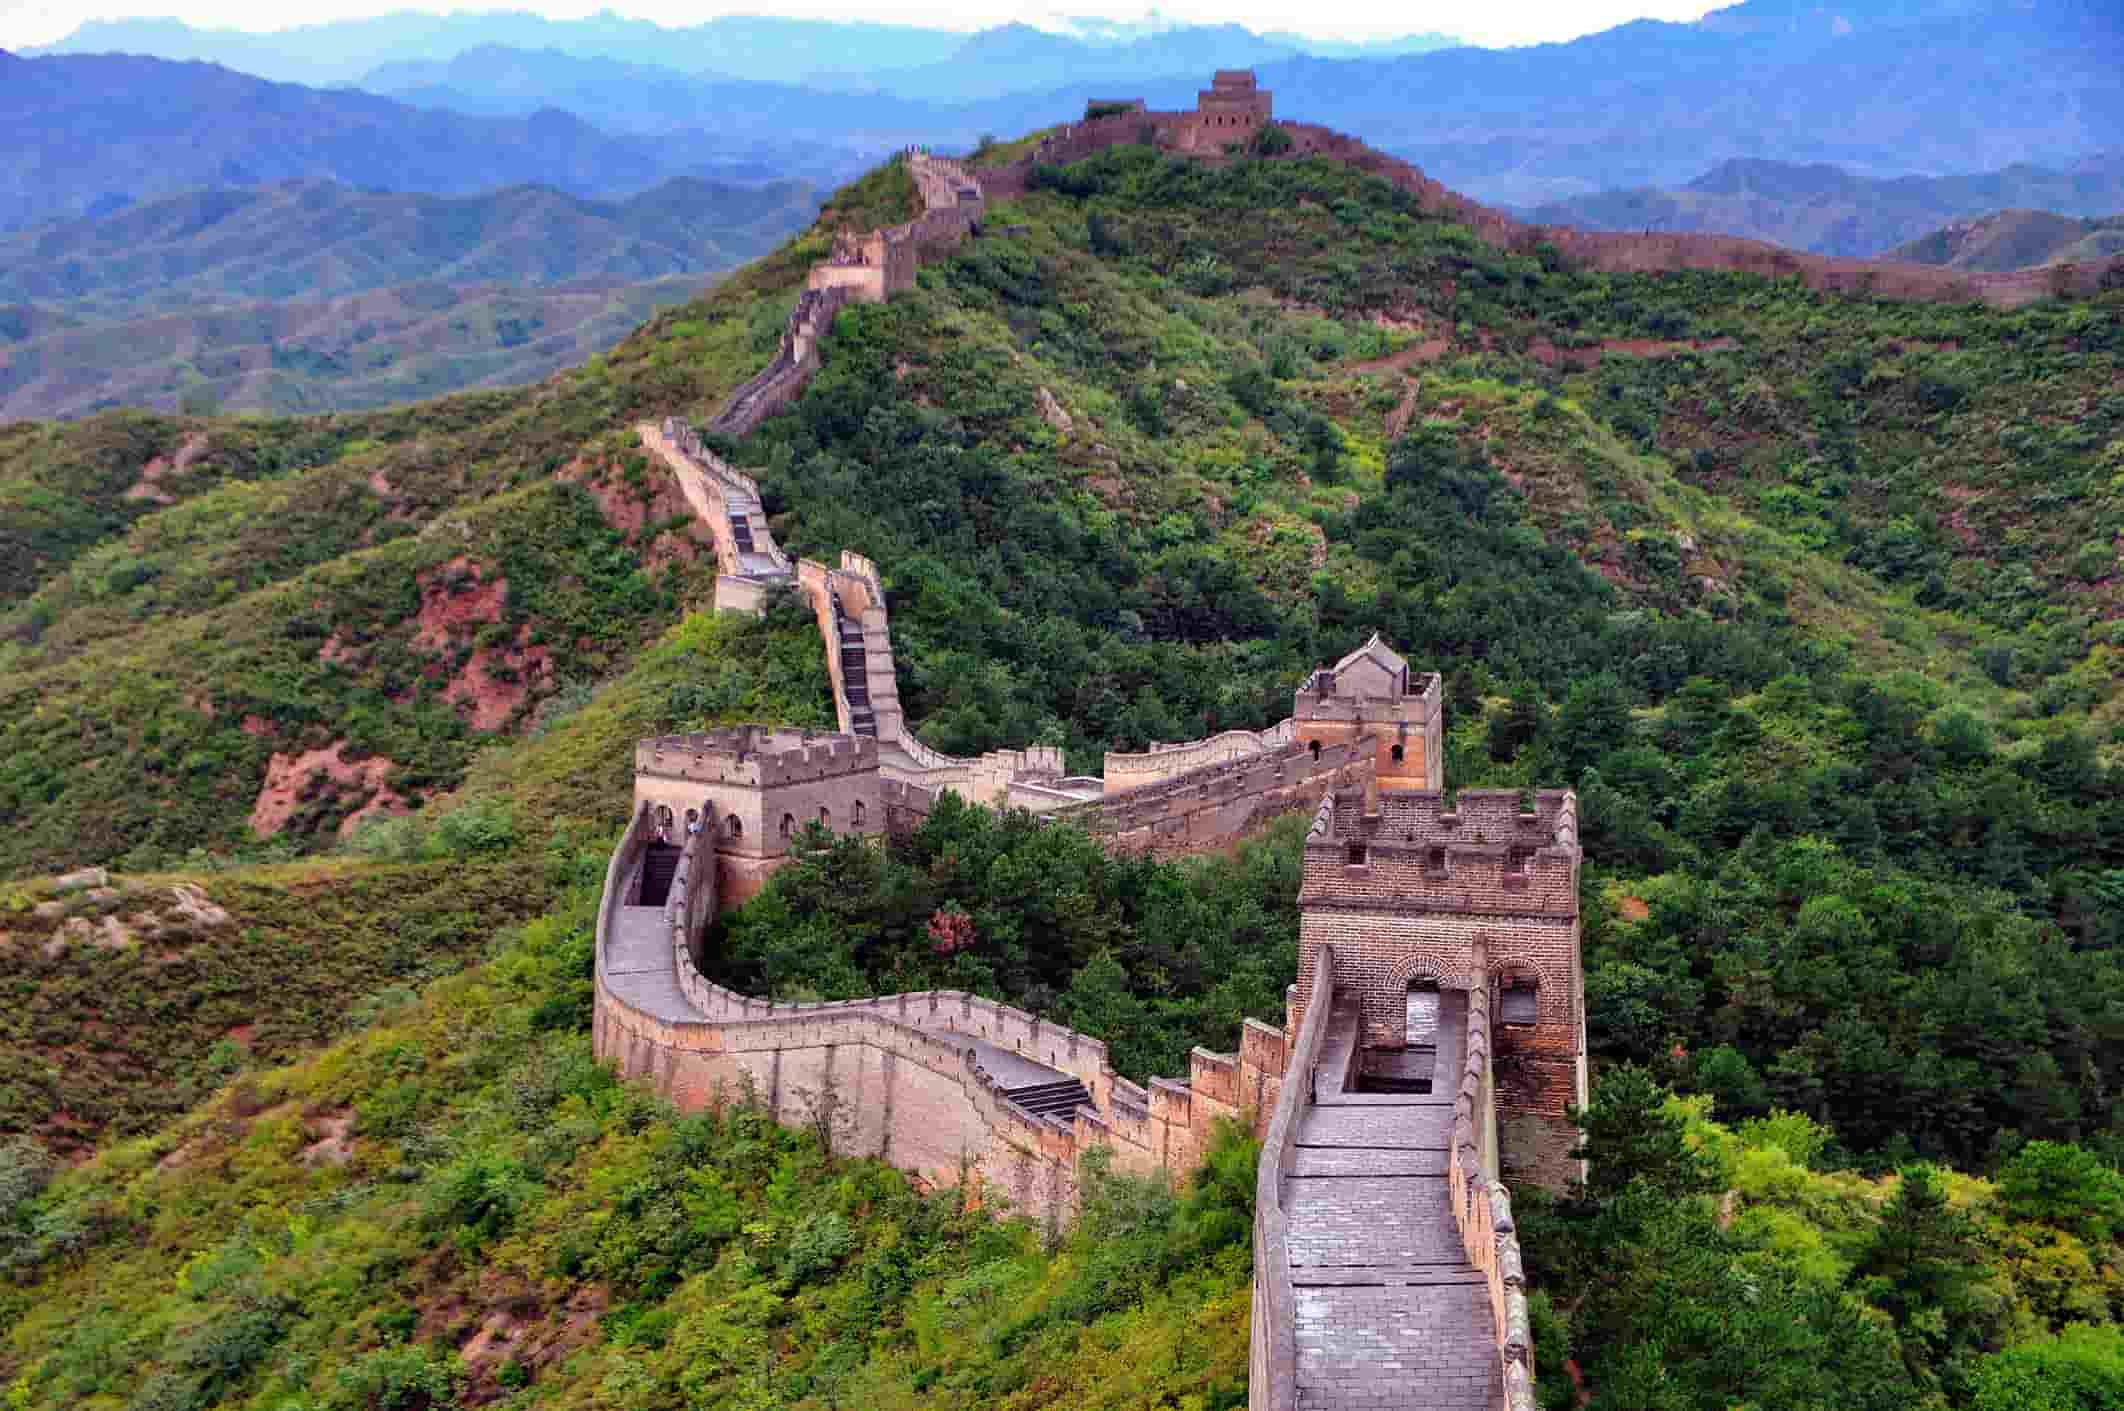 Overview Of The Great Wall Of China